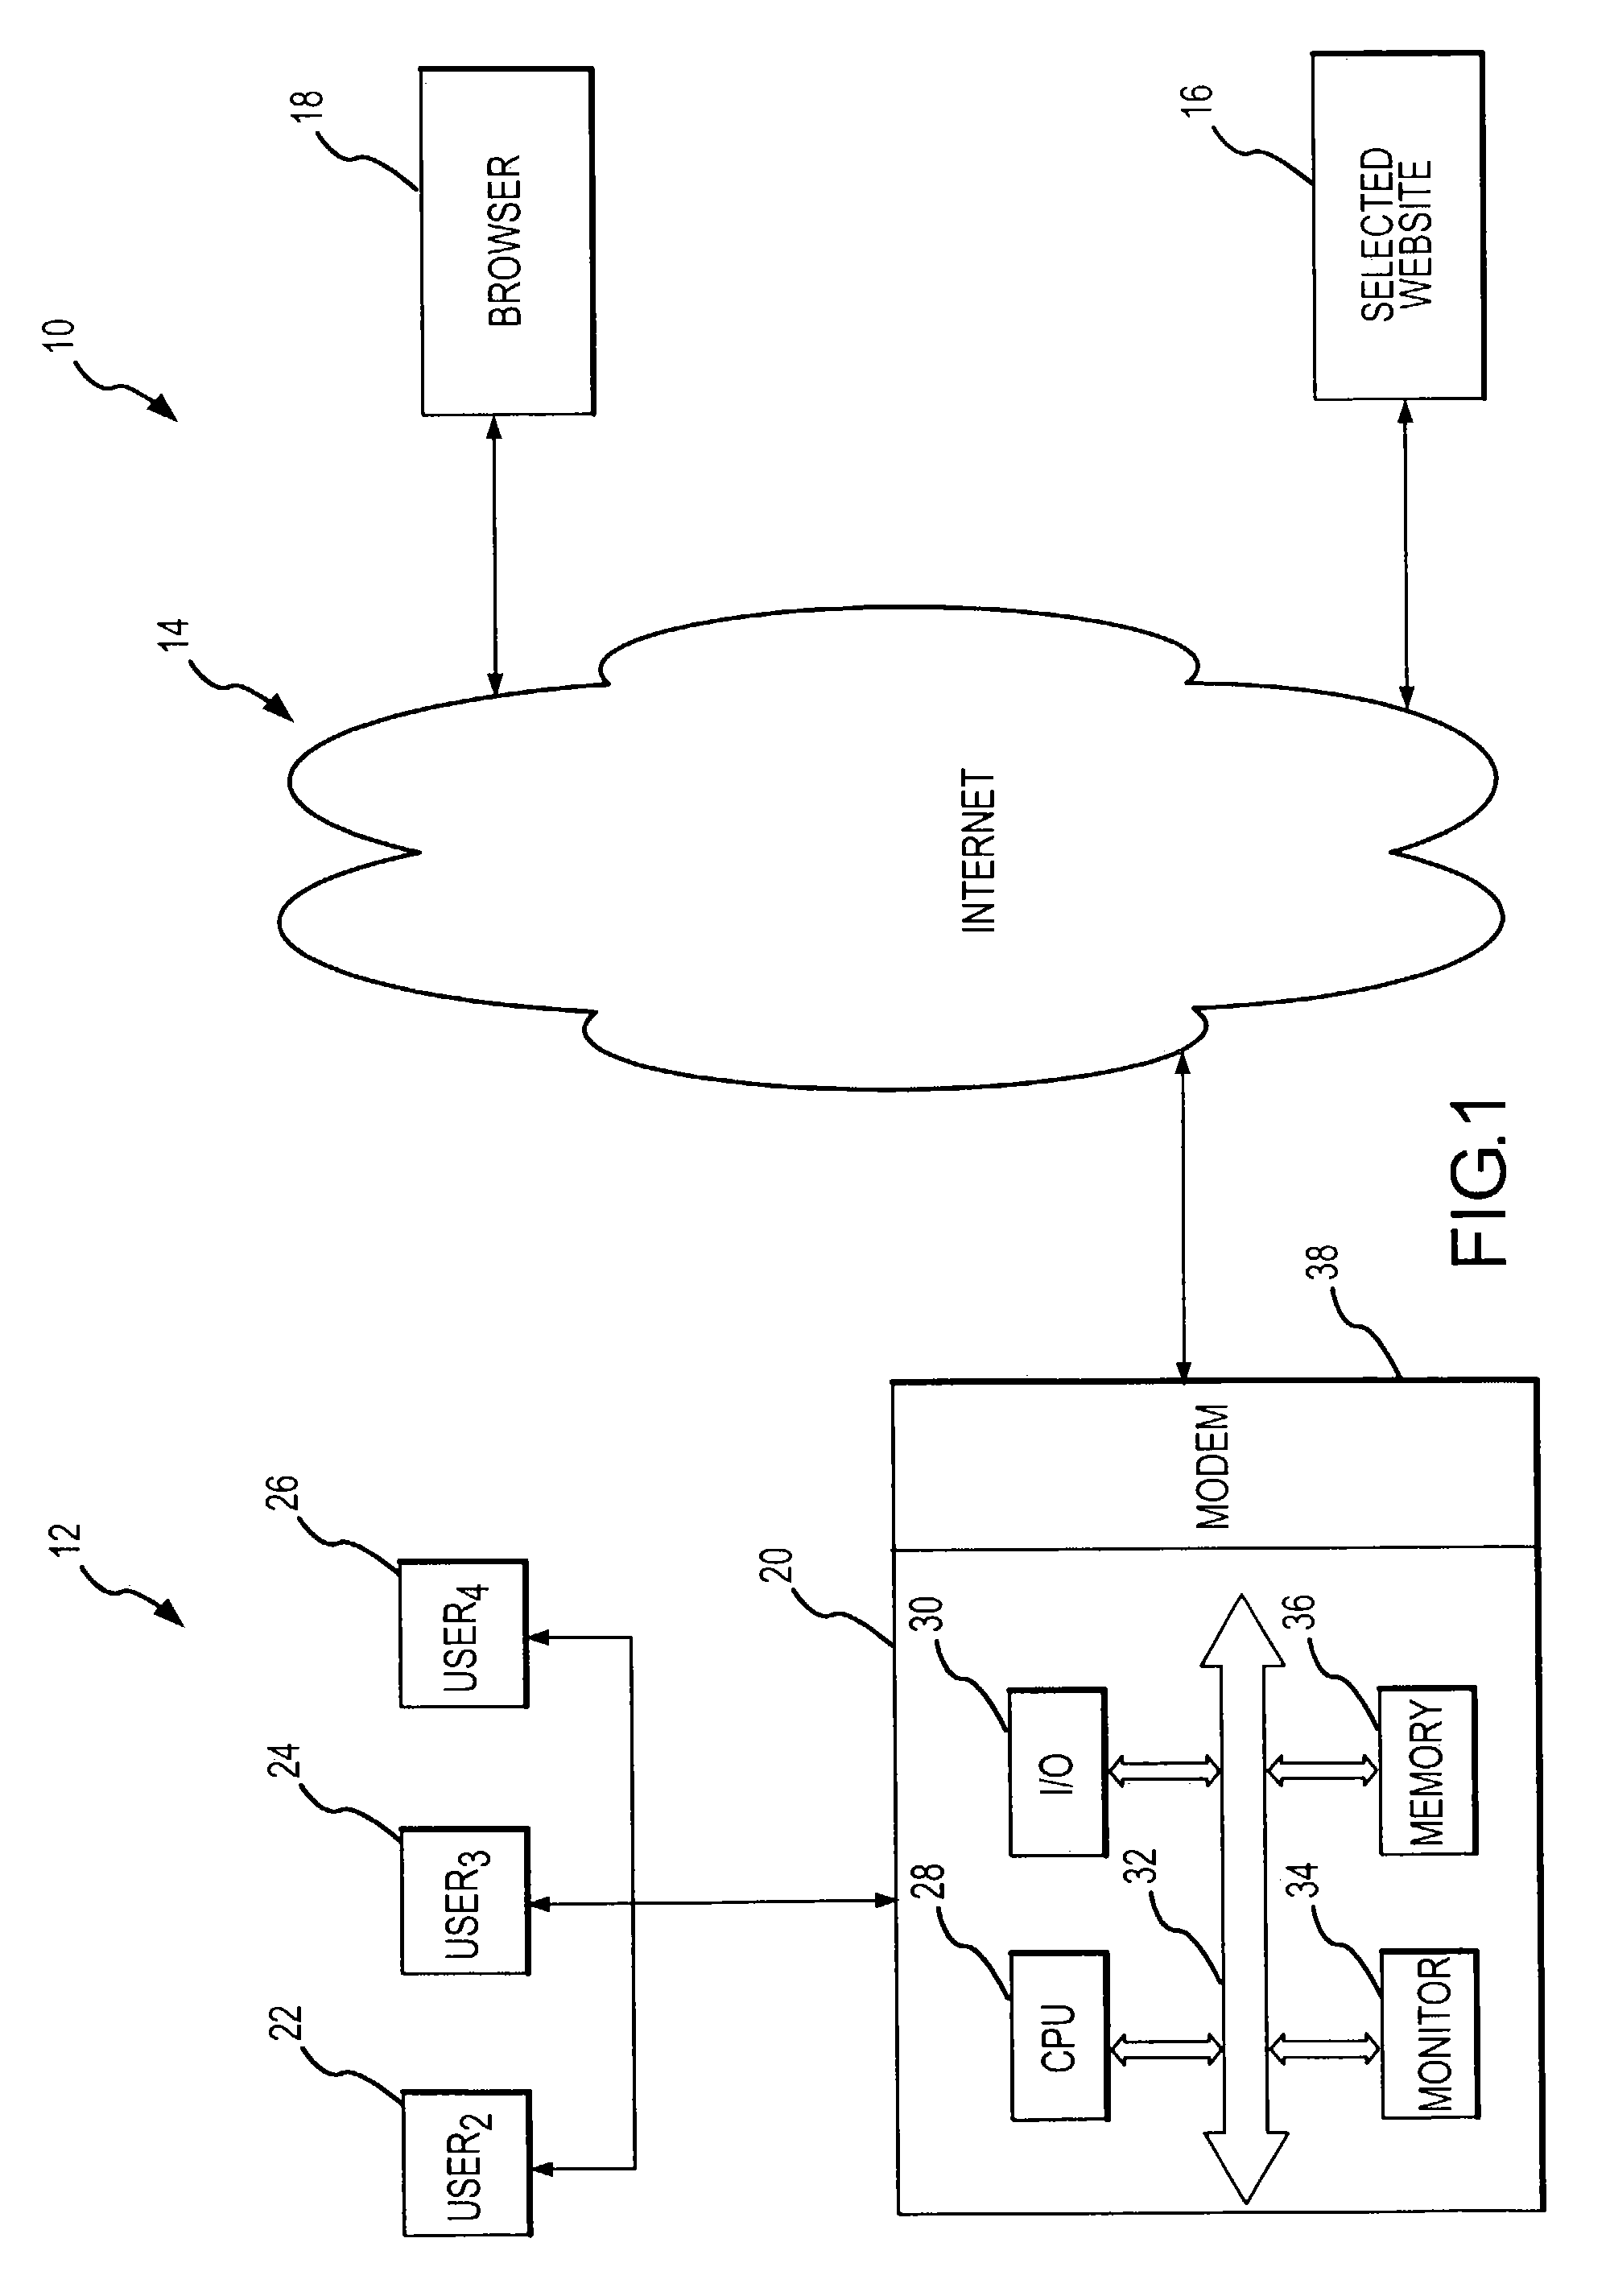 Method for providing node targeted content in an addressable network